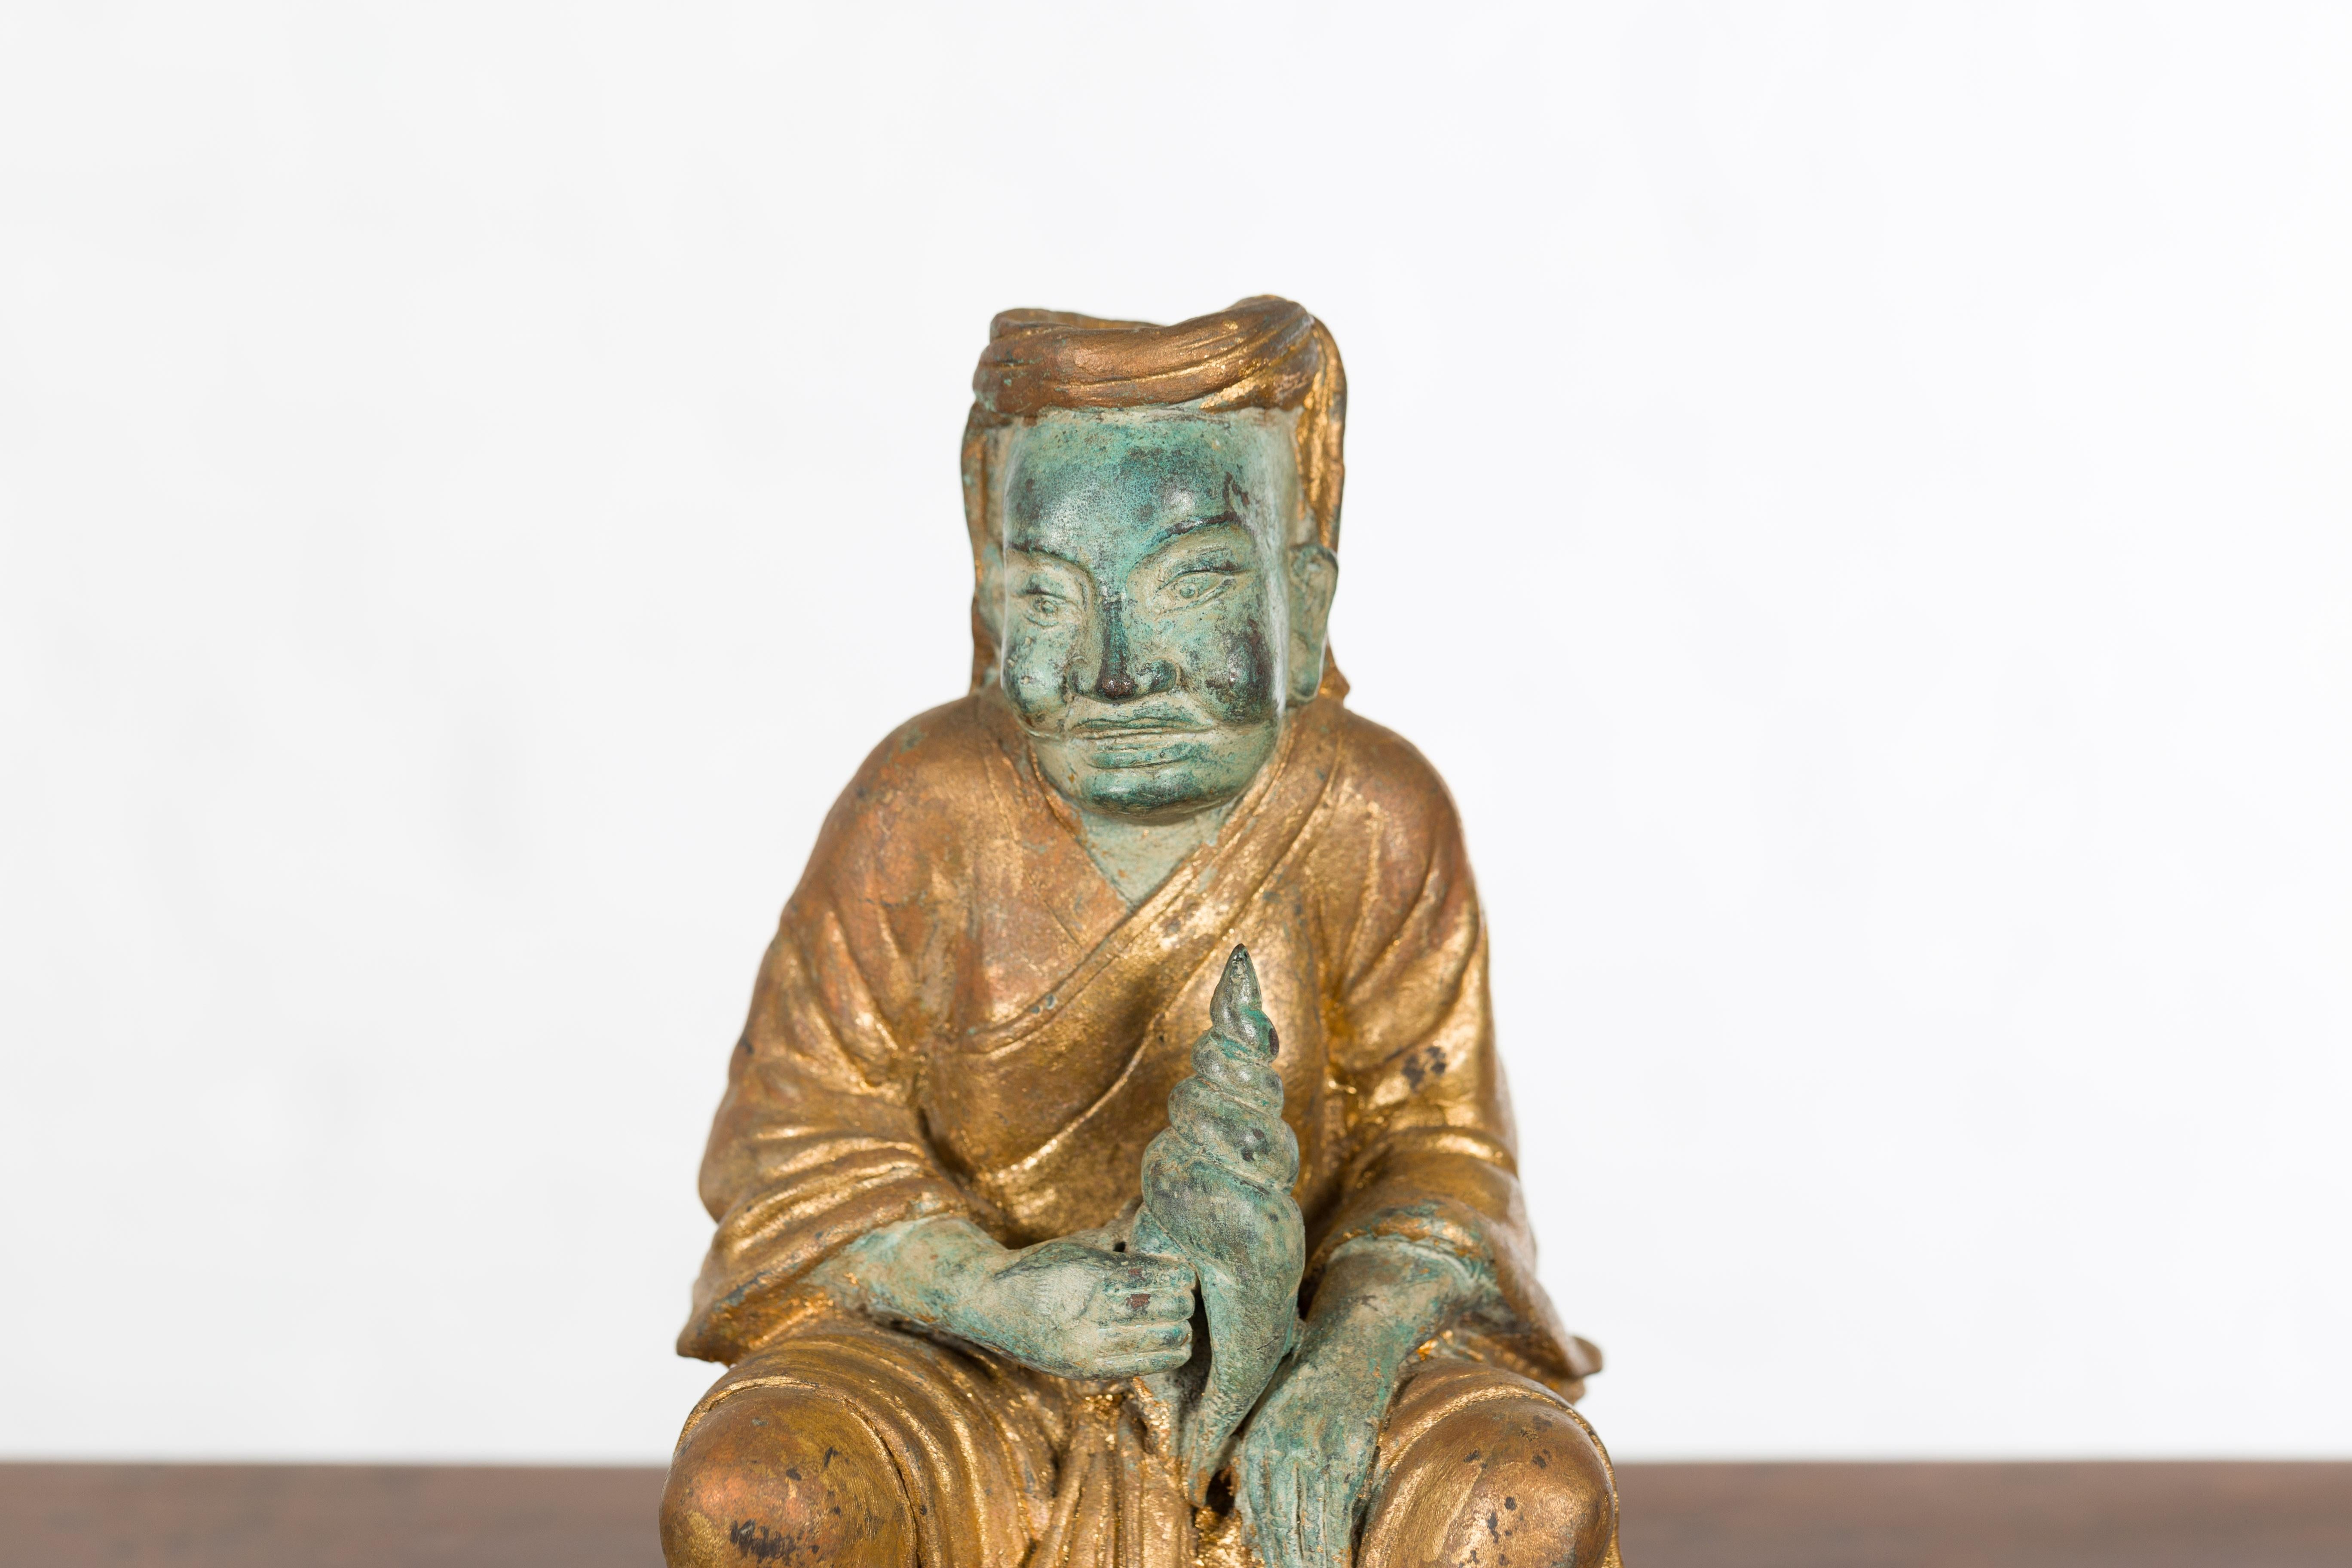 20th Century Petite Thai Verde and Gilded Statuette of a Seated Monk Holding a Conch Shell